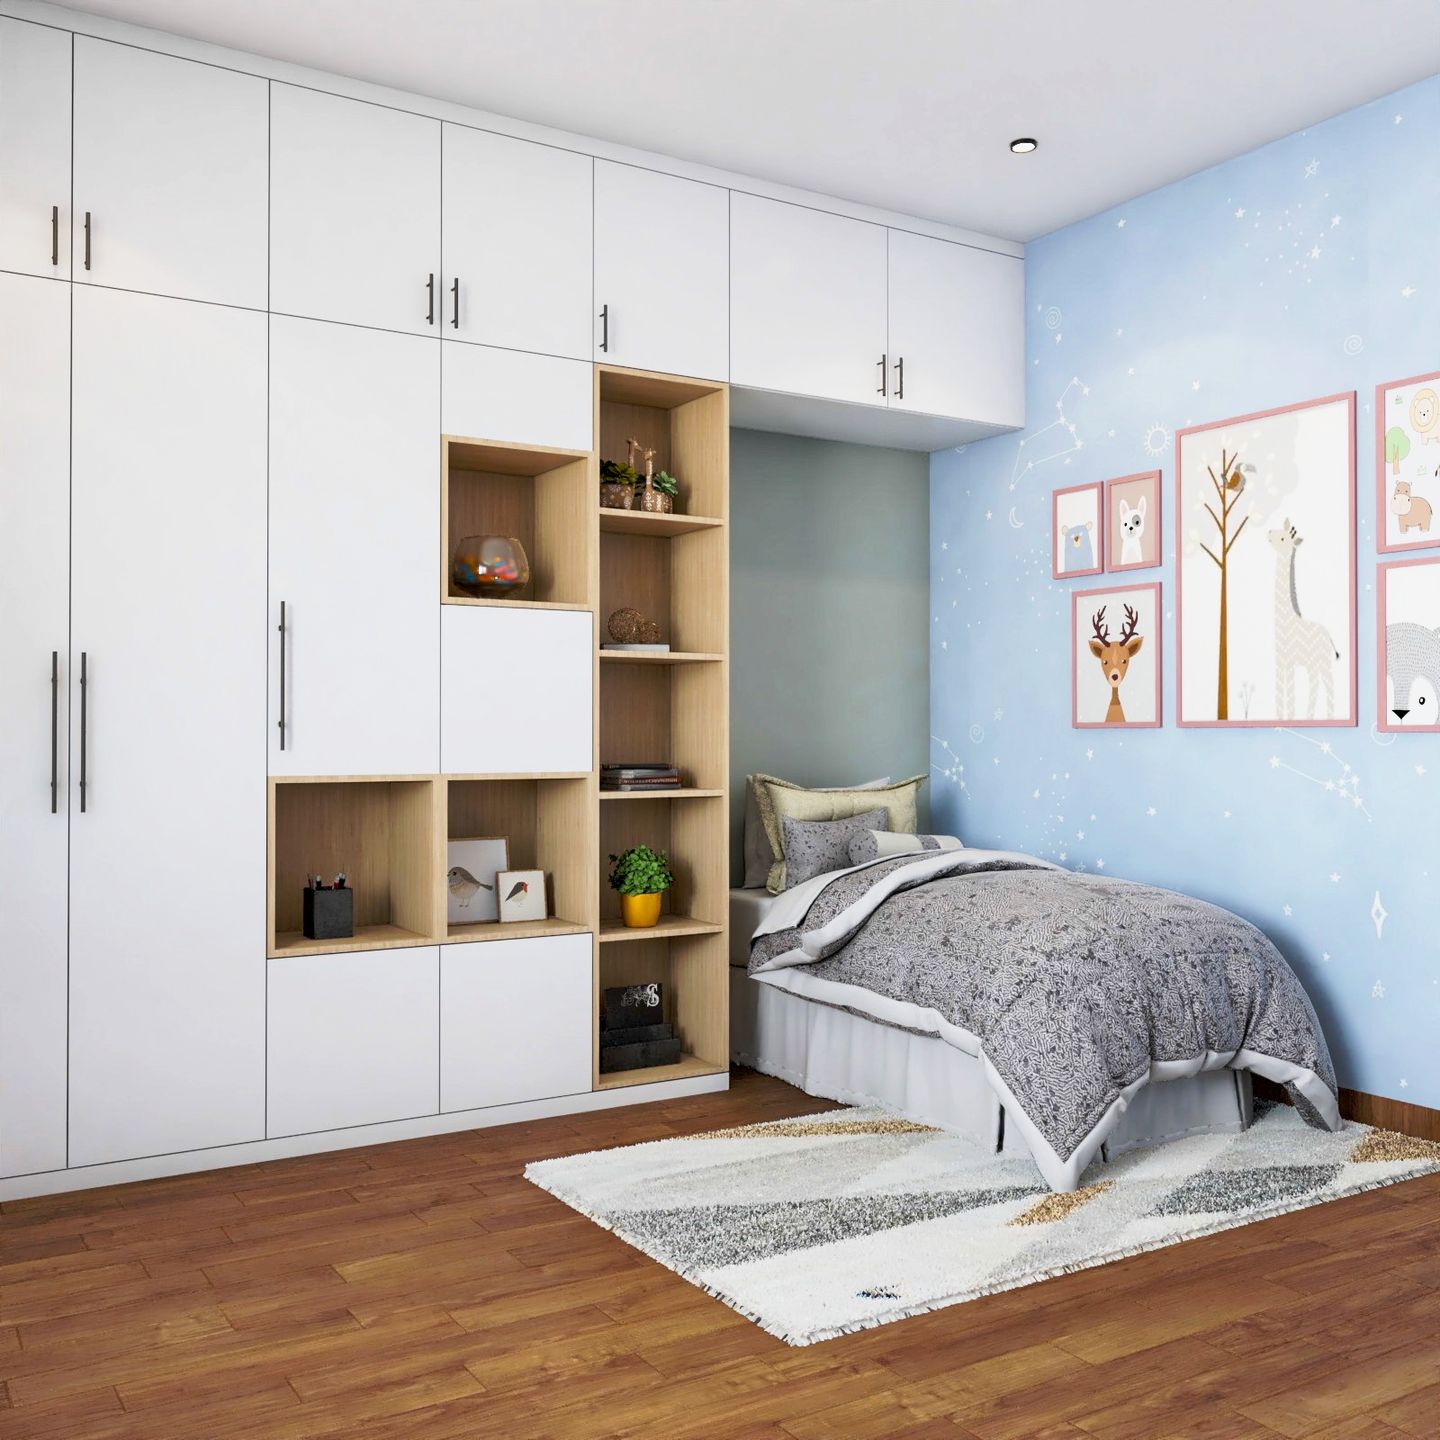 Kids Room Design With Integrated Bed And Wardrobe - Livspace